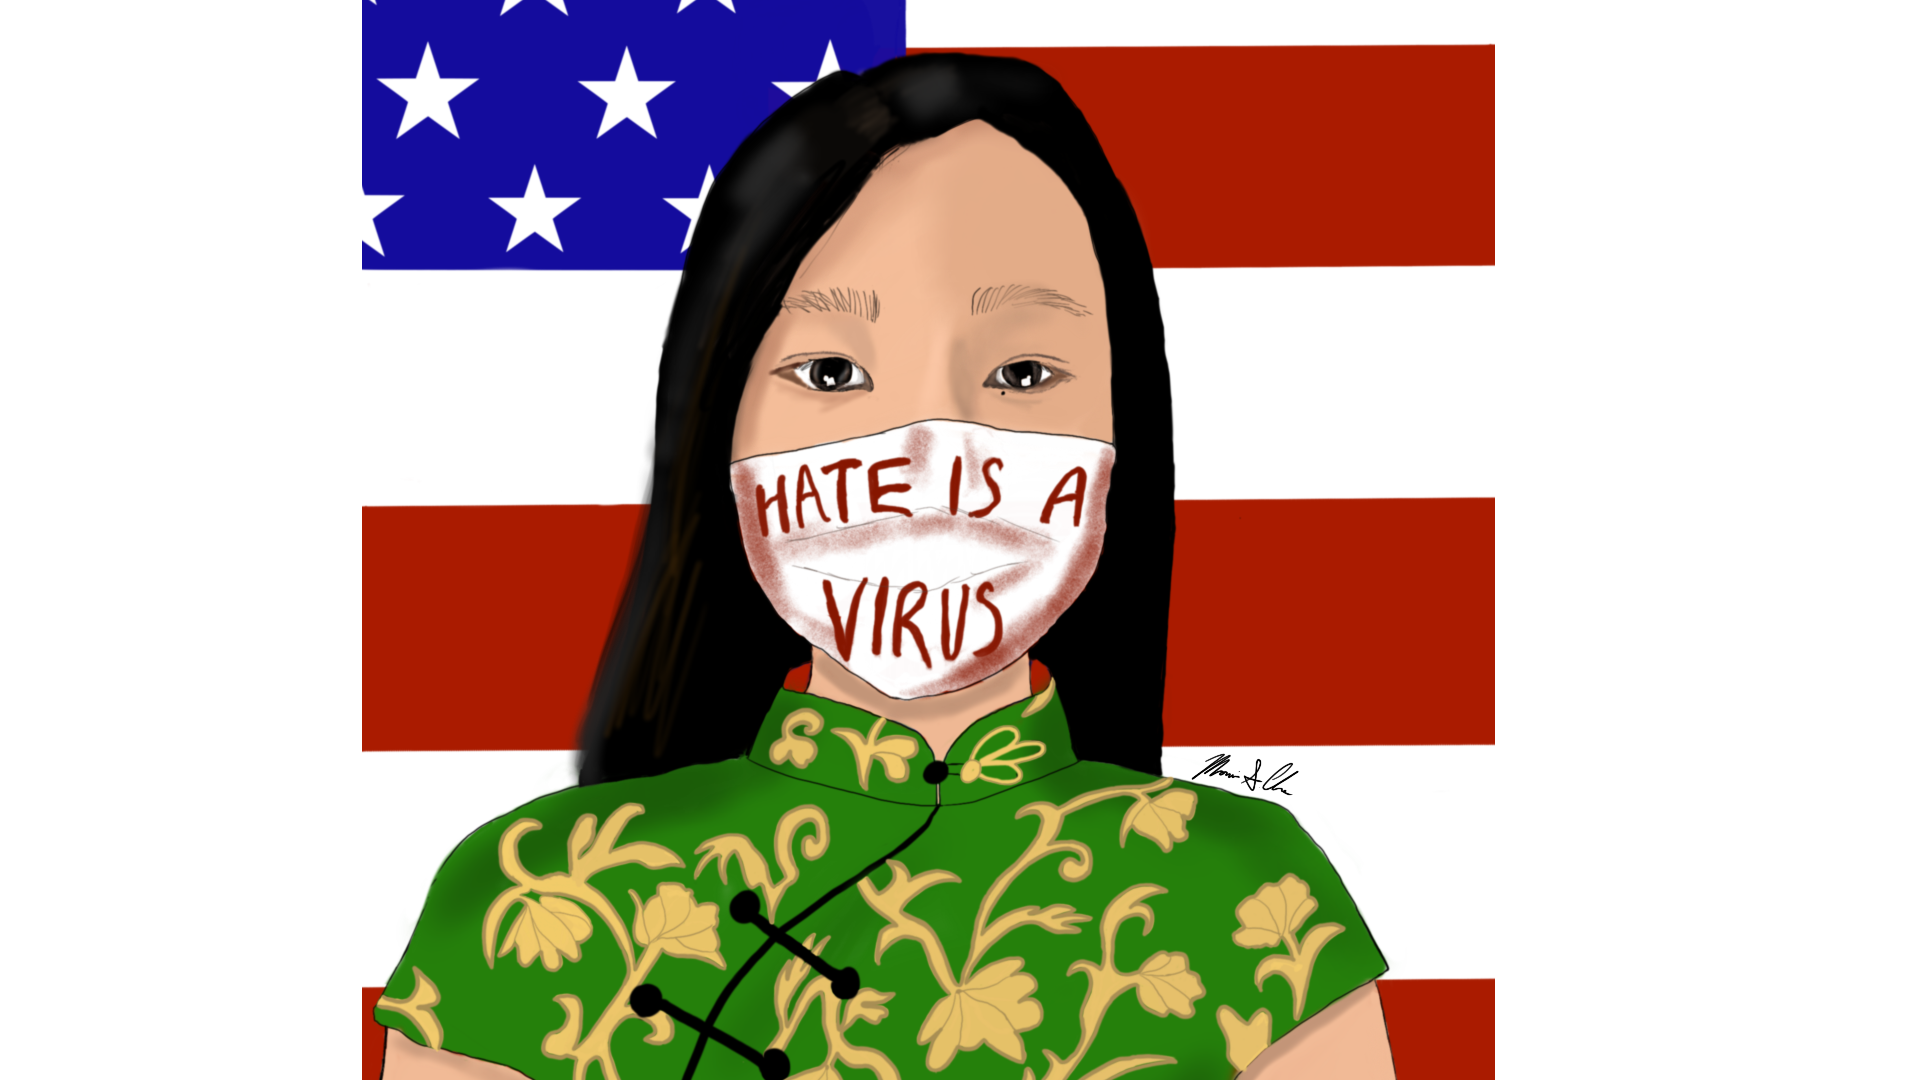 "Hate Is A Virus" by Monica Chan